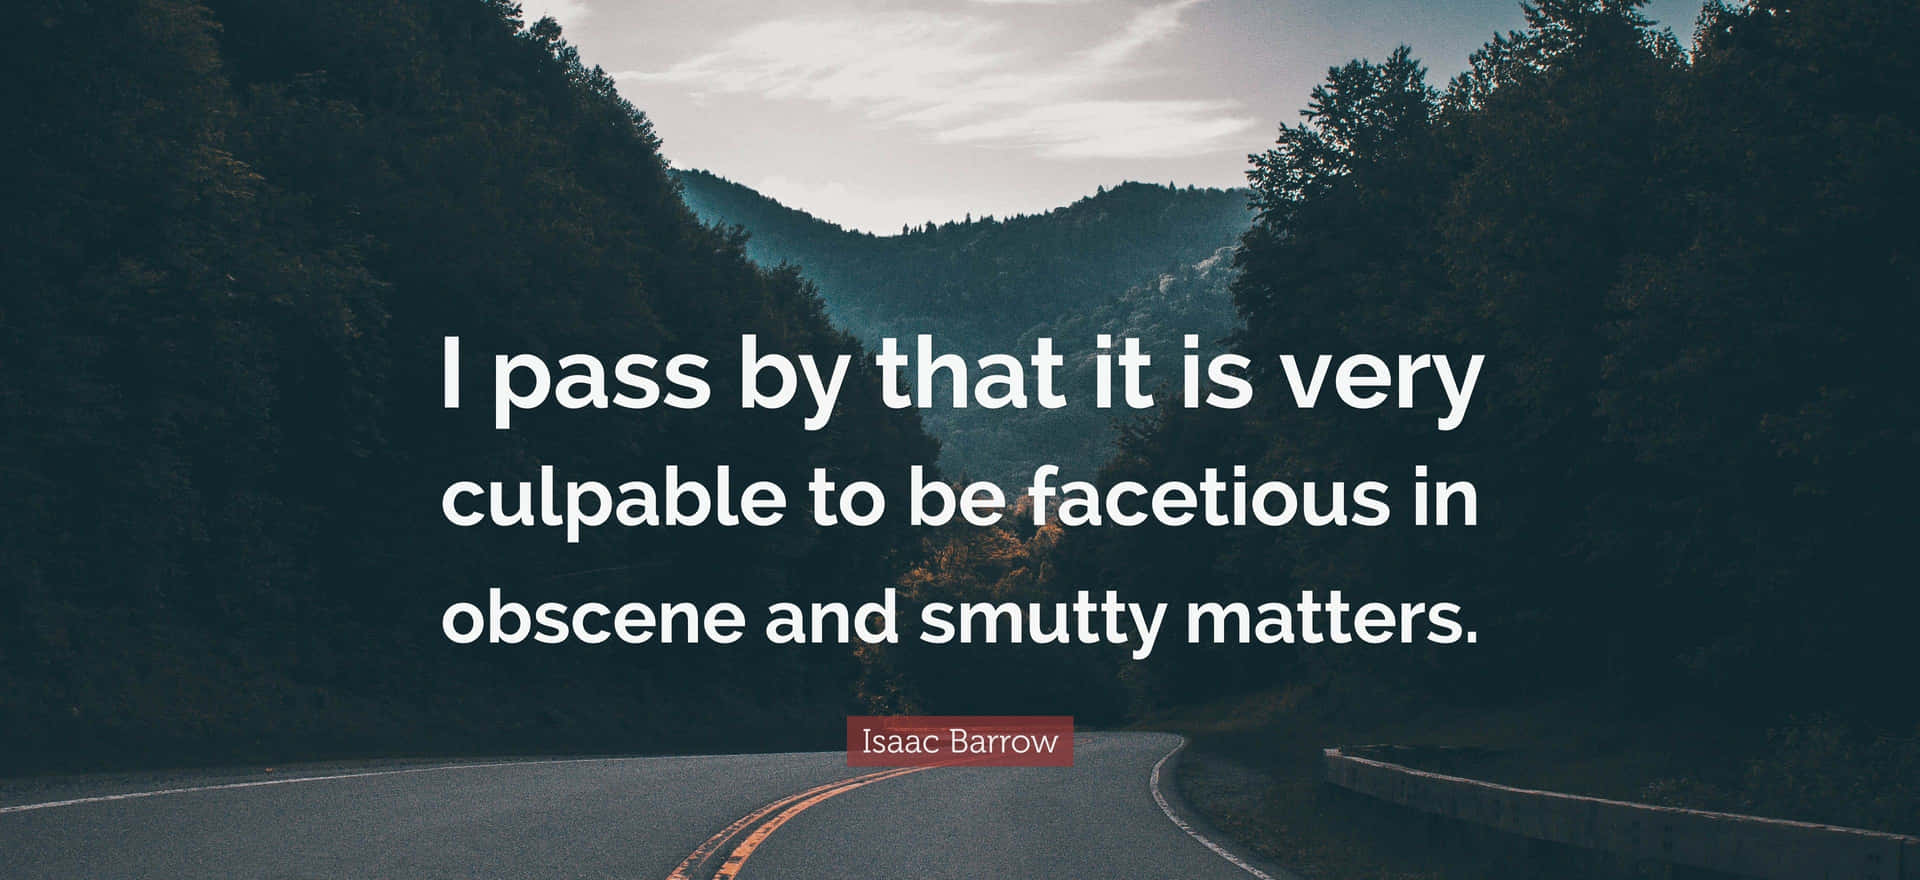 Culpable Facetiousness Quote Road Backdrop Wallpaper